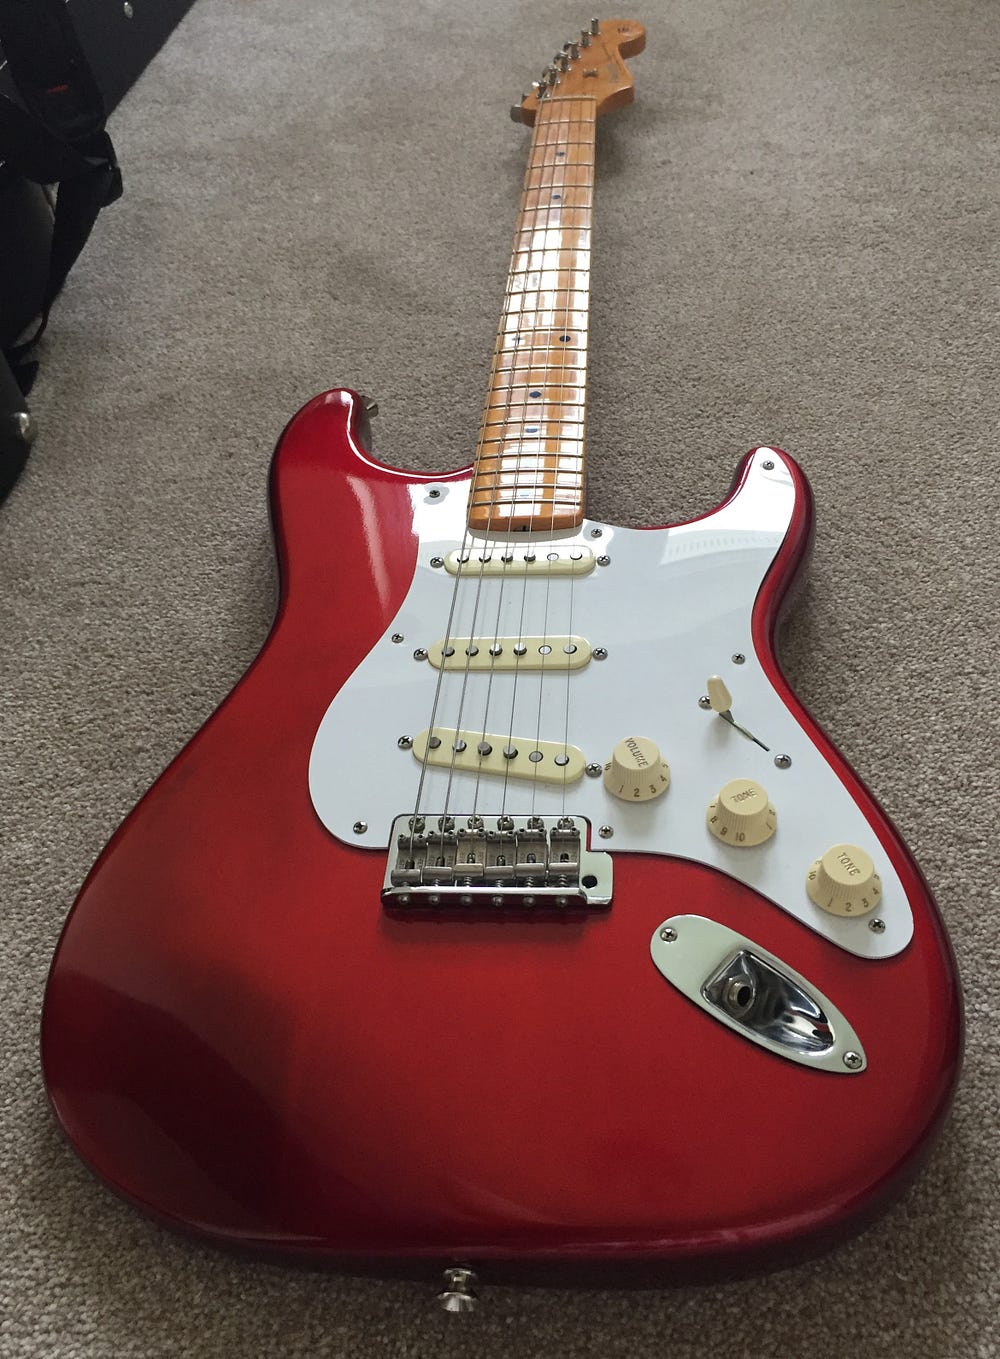 New Guitar Day: Fender USA '57 Vintage Reissue Stratocaster Candy Apple Red  with lacquered maple neck and fretboard | by Jonathan Thomas | Red Chair  Riffs | Medium